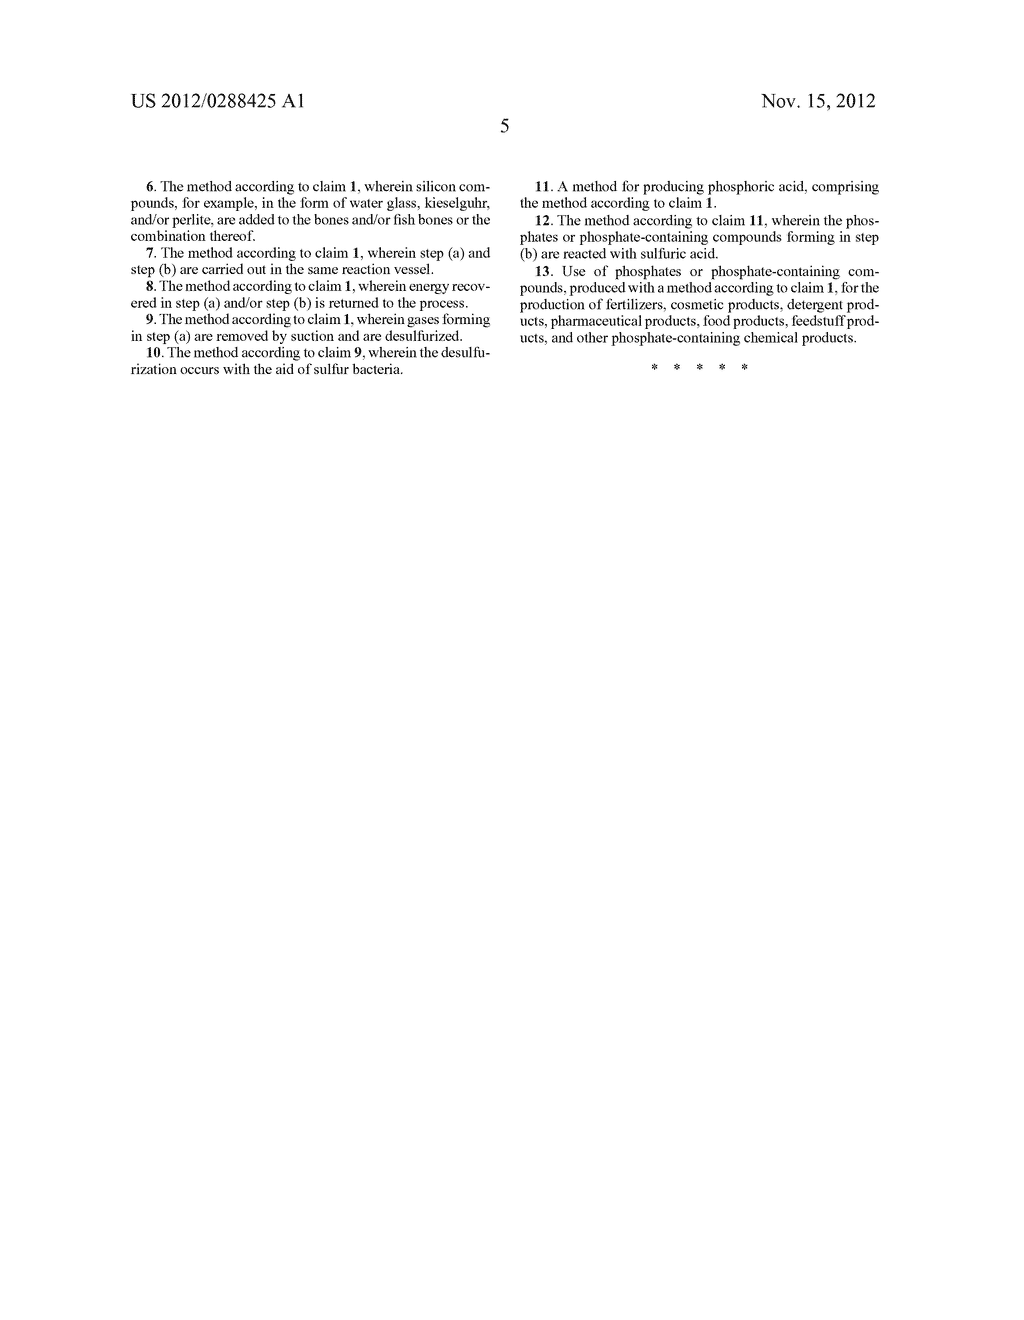 METHOD FOR PRODUCING PHOSPHATES AND PHOSPHATE-CONTAINING COMPOUNDS,     PARTICULARLY ALKALINE EARTH PHOSPHATES, ALKALINE EARTH SILICOPHOSPHATES,     OR ALKALINE EARTH OXIDES - diagram, schematic, and image 07